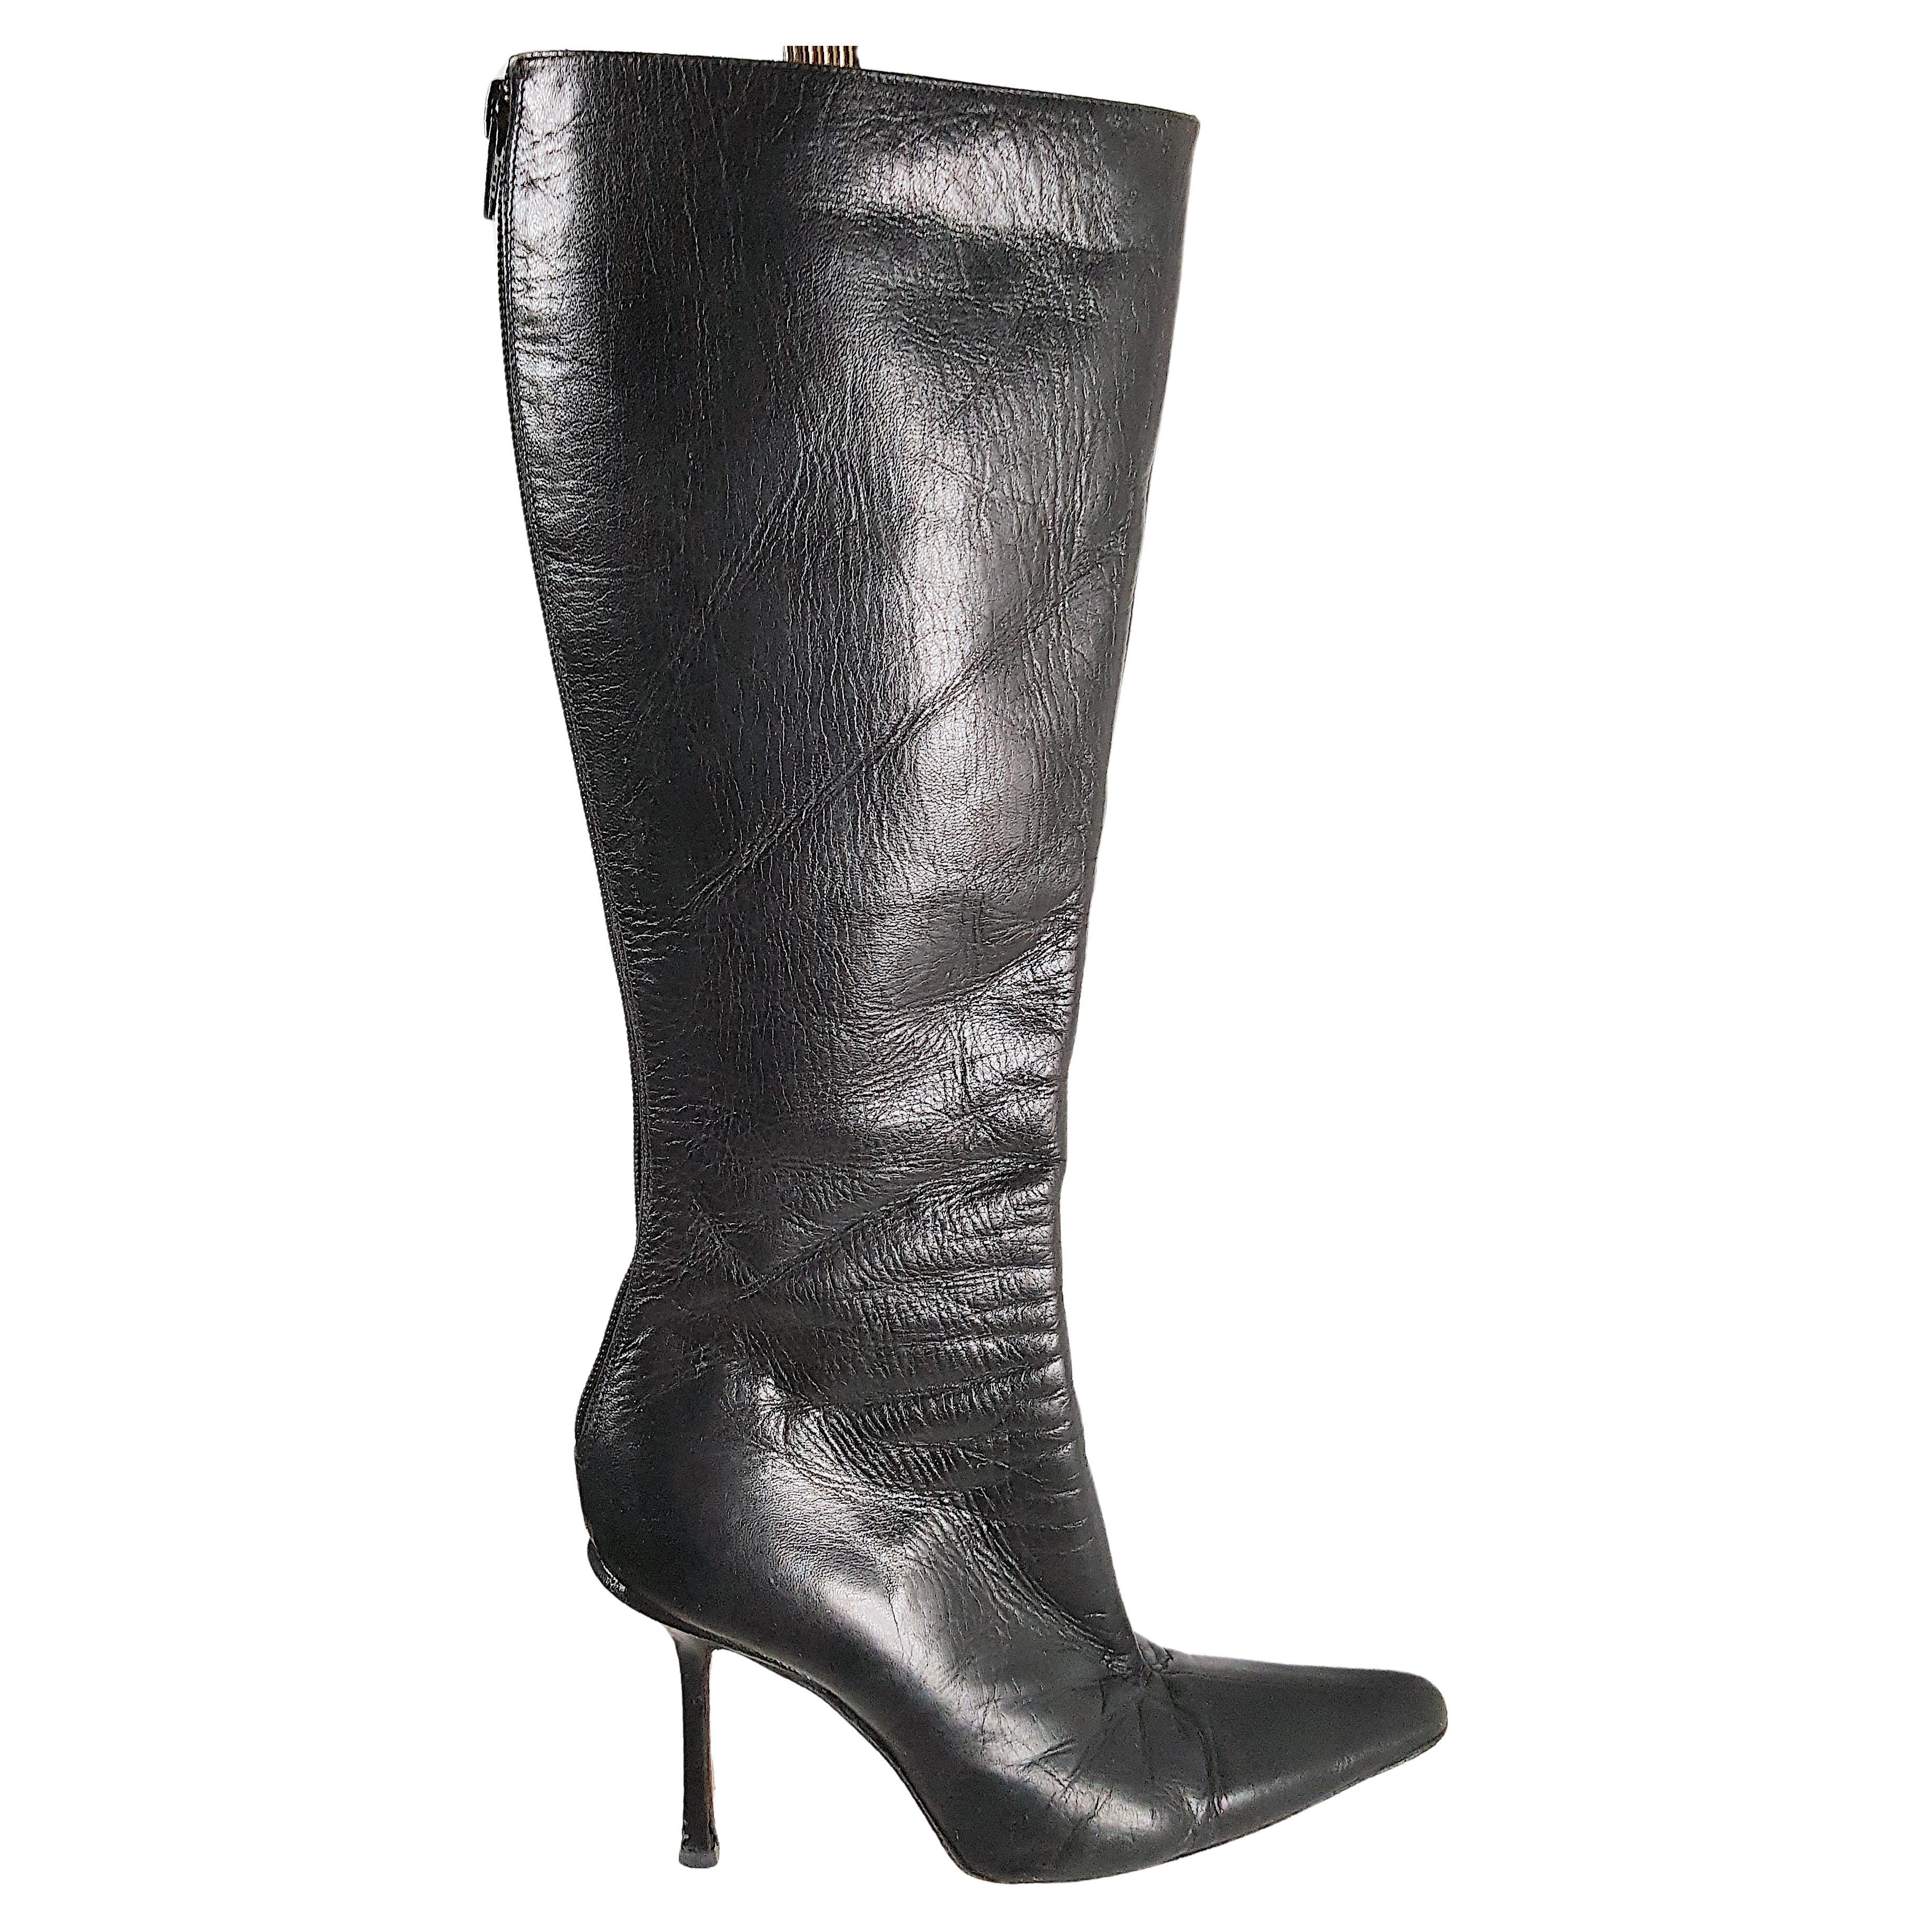 These Jimmy Choo tall stiletto pointed-toe black smooth calf-leather dress boots with an invisible zip in back were among the most coveted of his finely crafted 